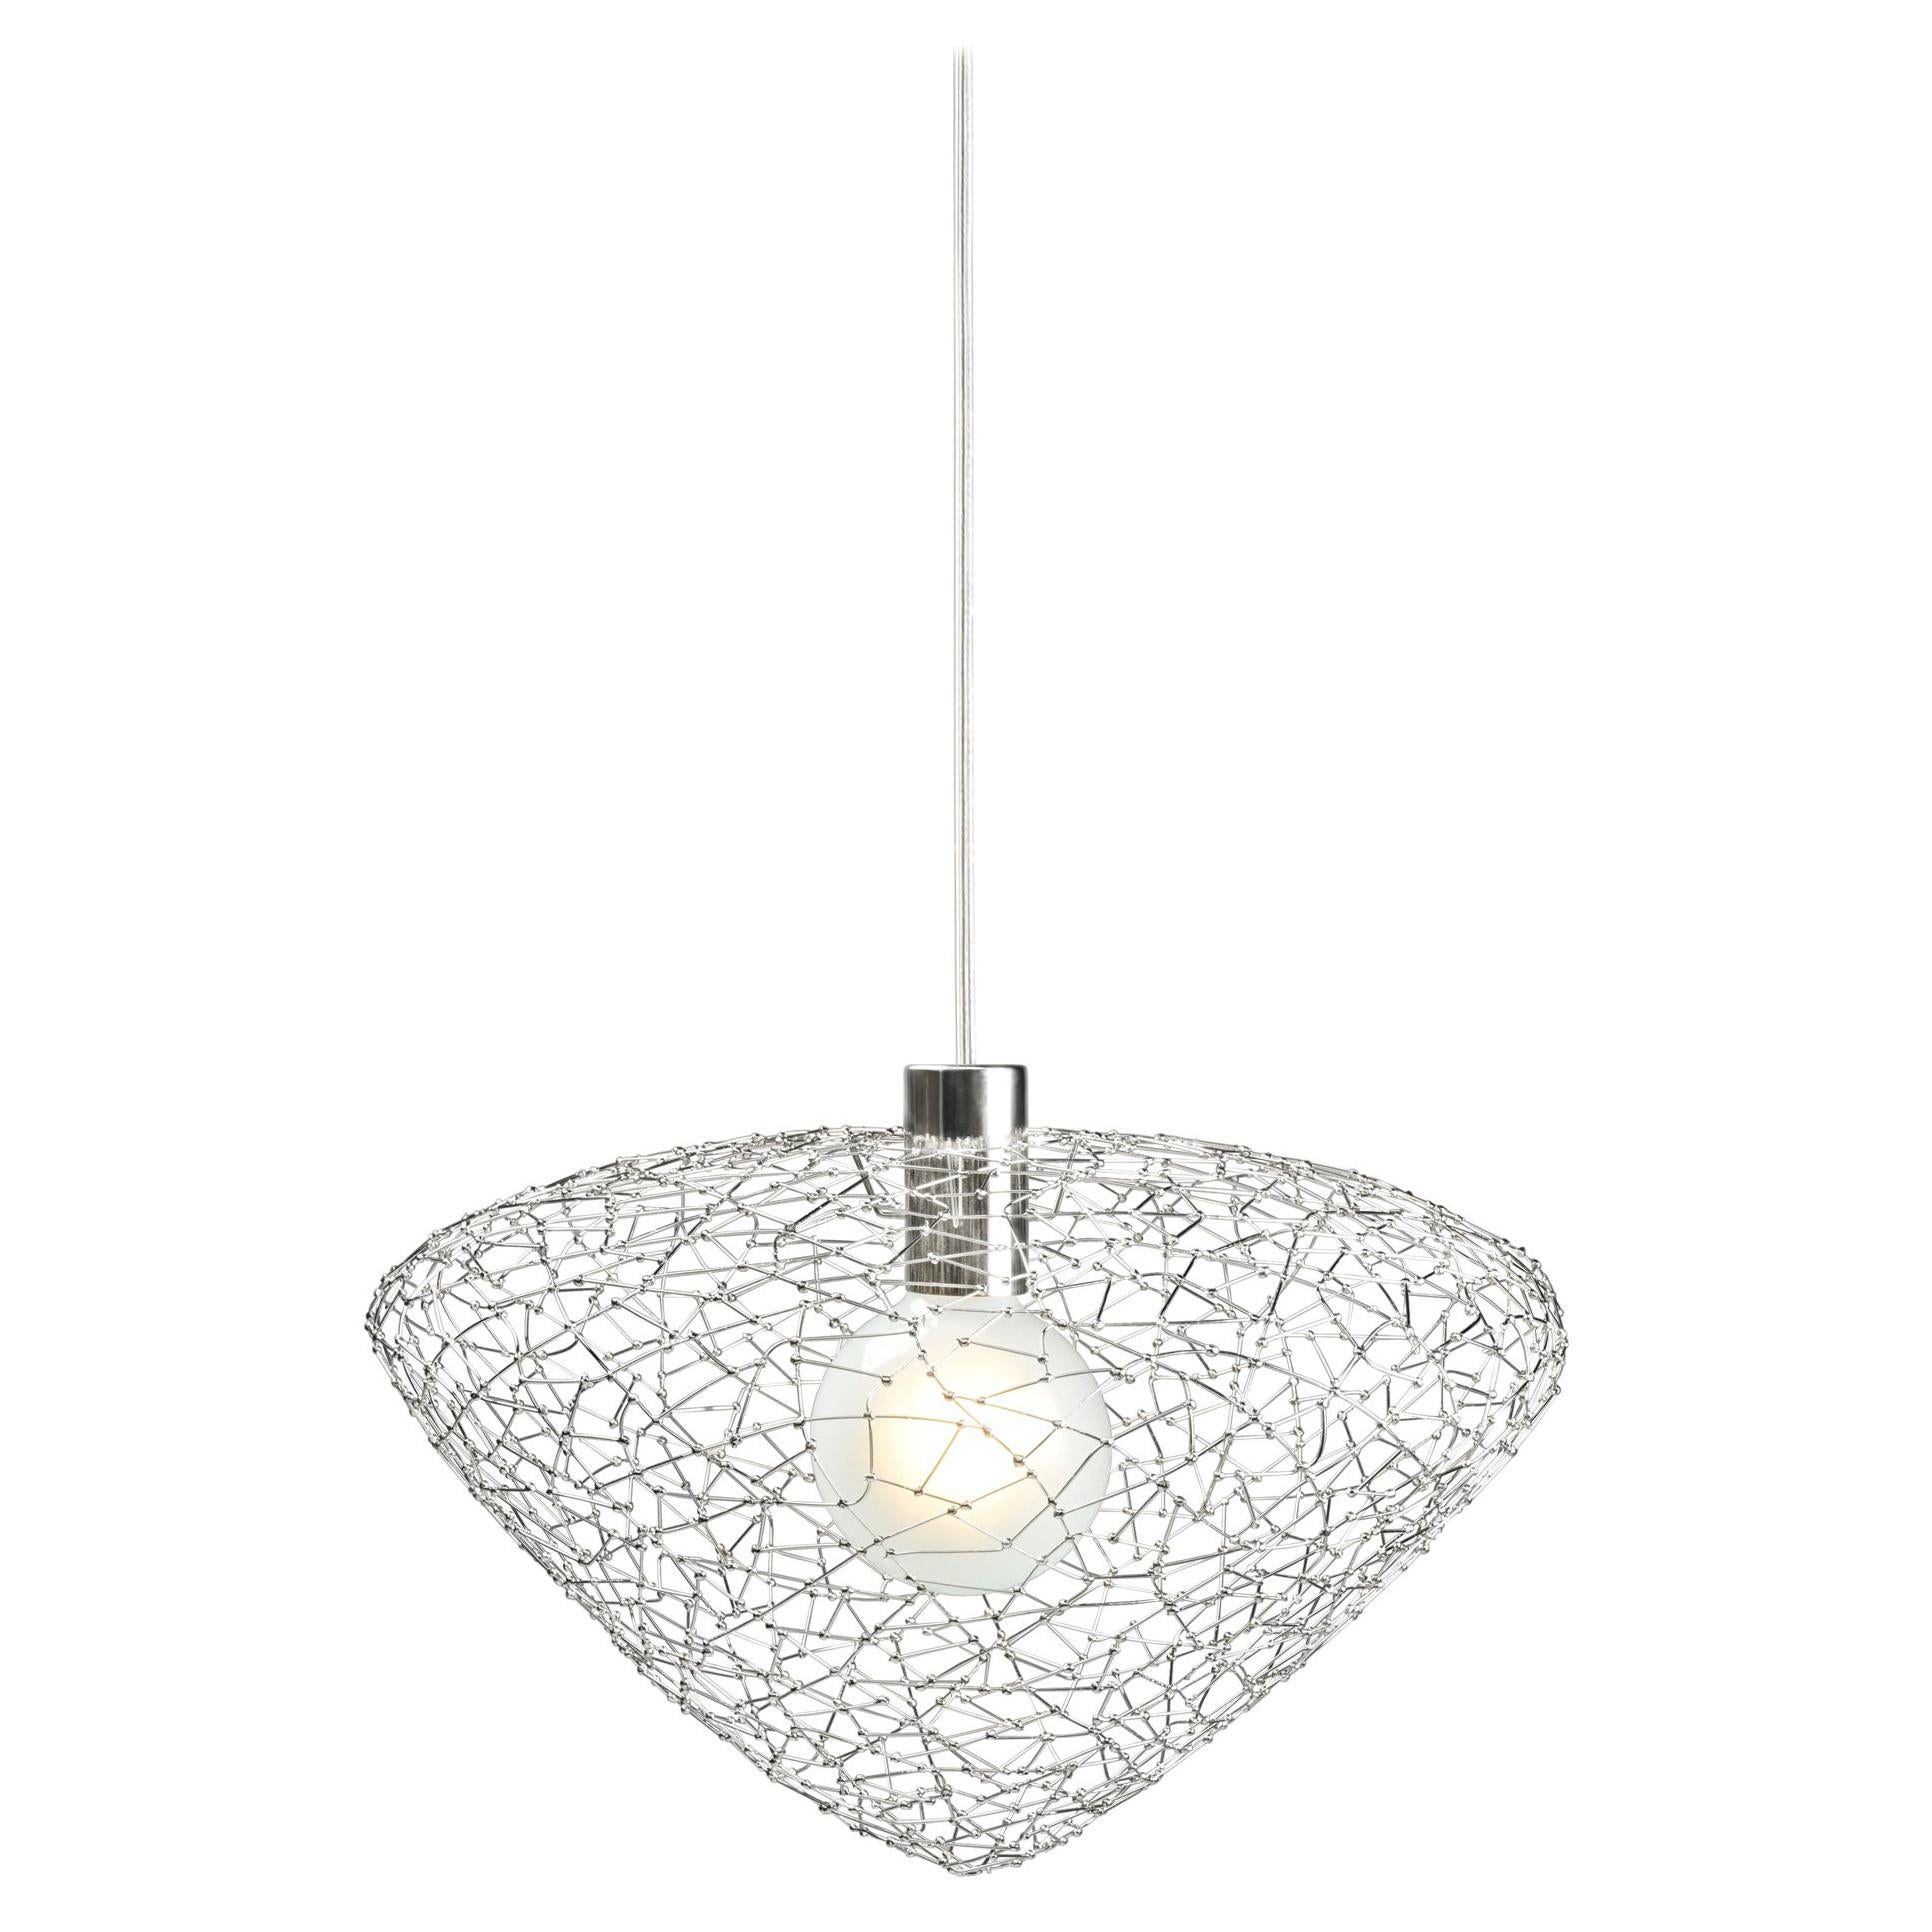 Daffy Diamond 'Silver' by Ango, Handcrafted Pendant Lights in Jewelry Look